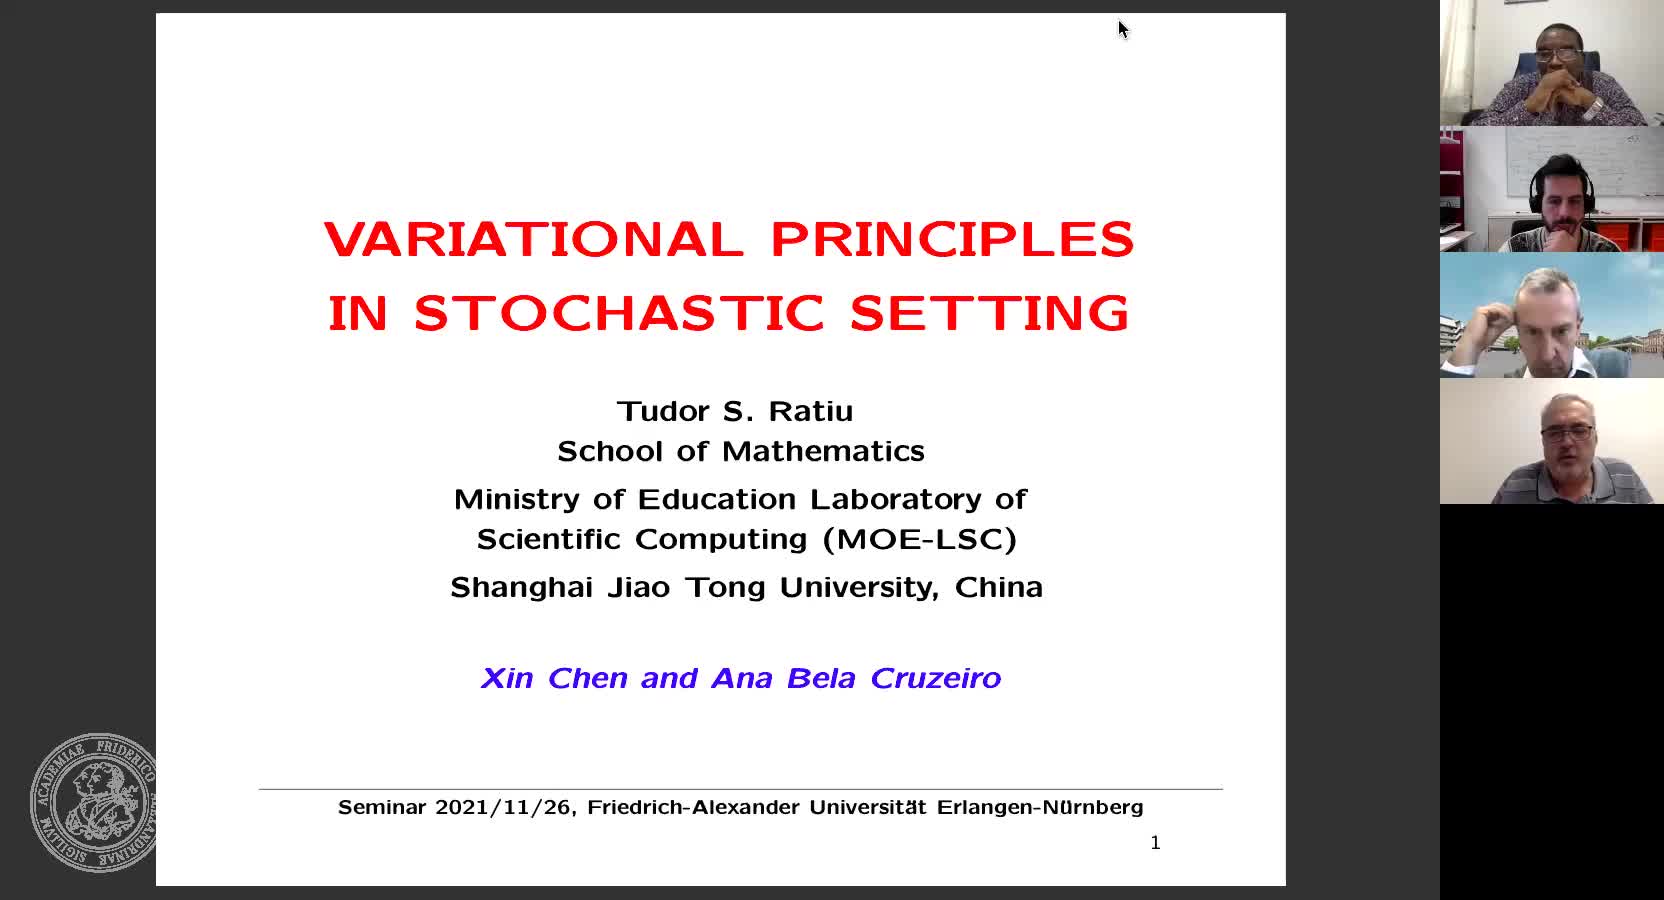 Variational principles in a stochastic setting (T. Ratiu, Shanghai Jiao Tong University) preview image